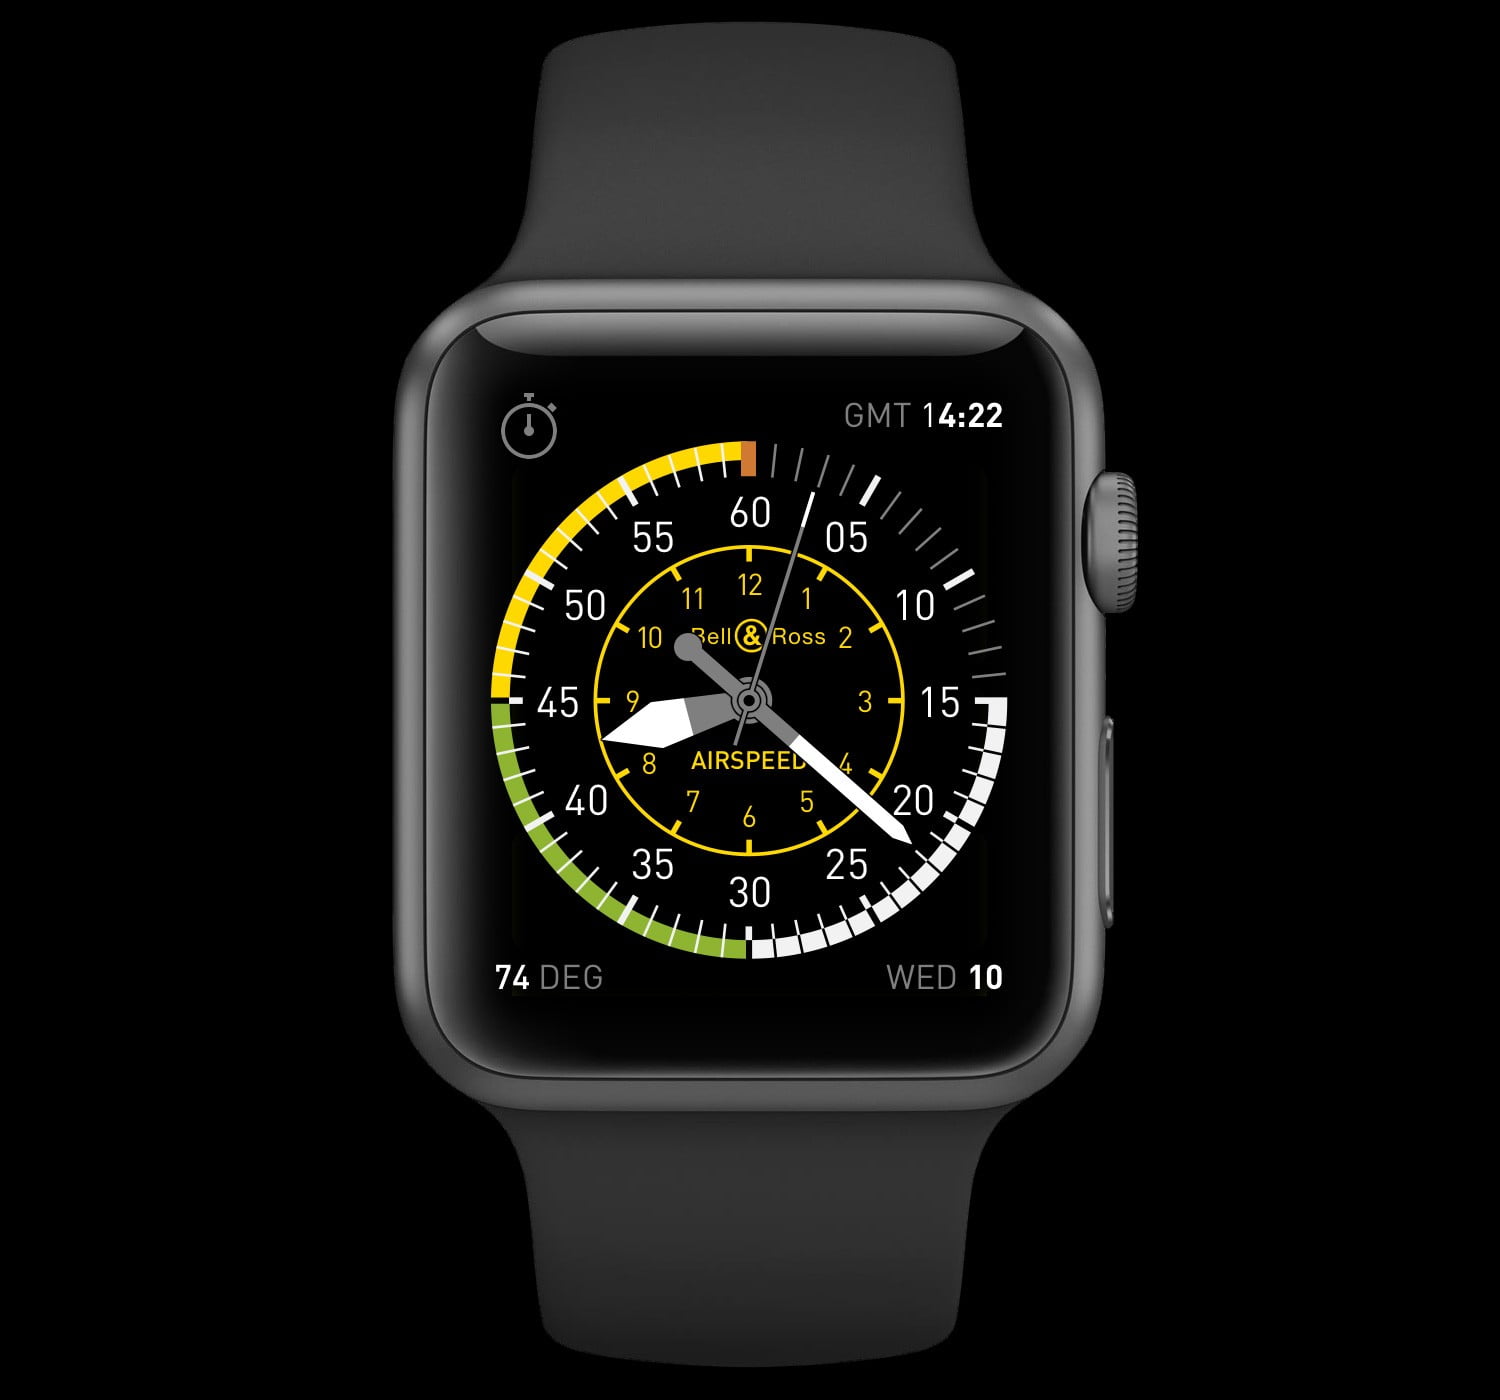 Space gray aluminum case Apple Watch with black Sport Band, watch